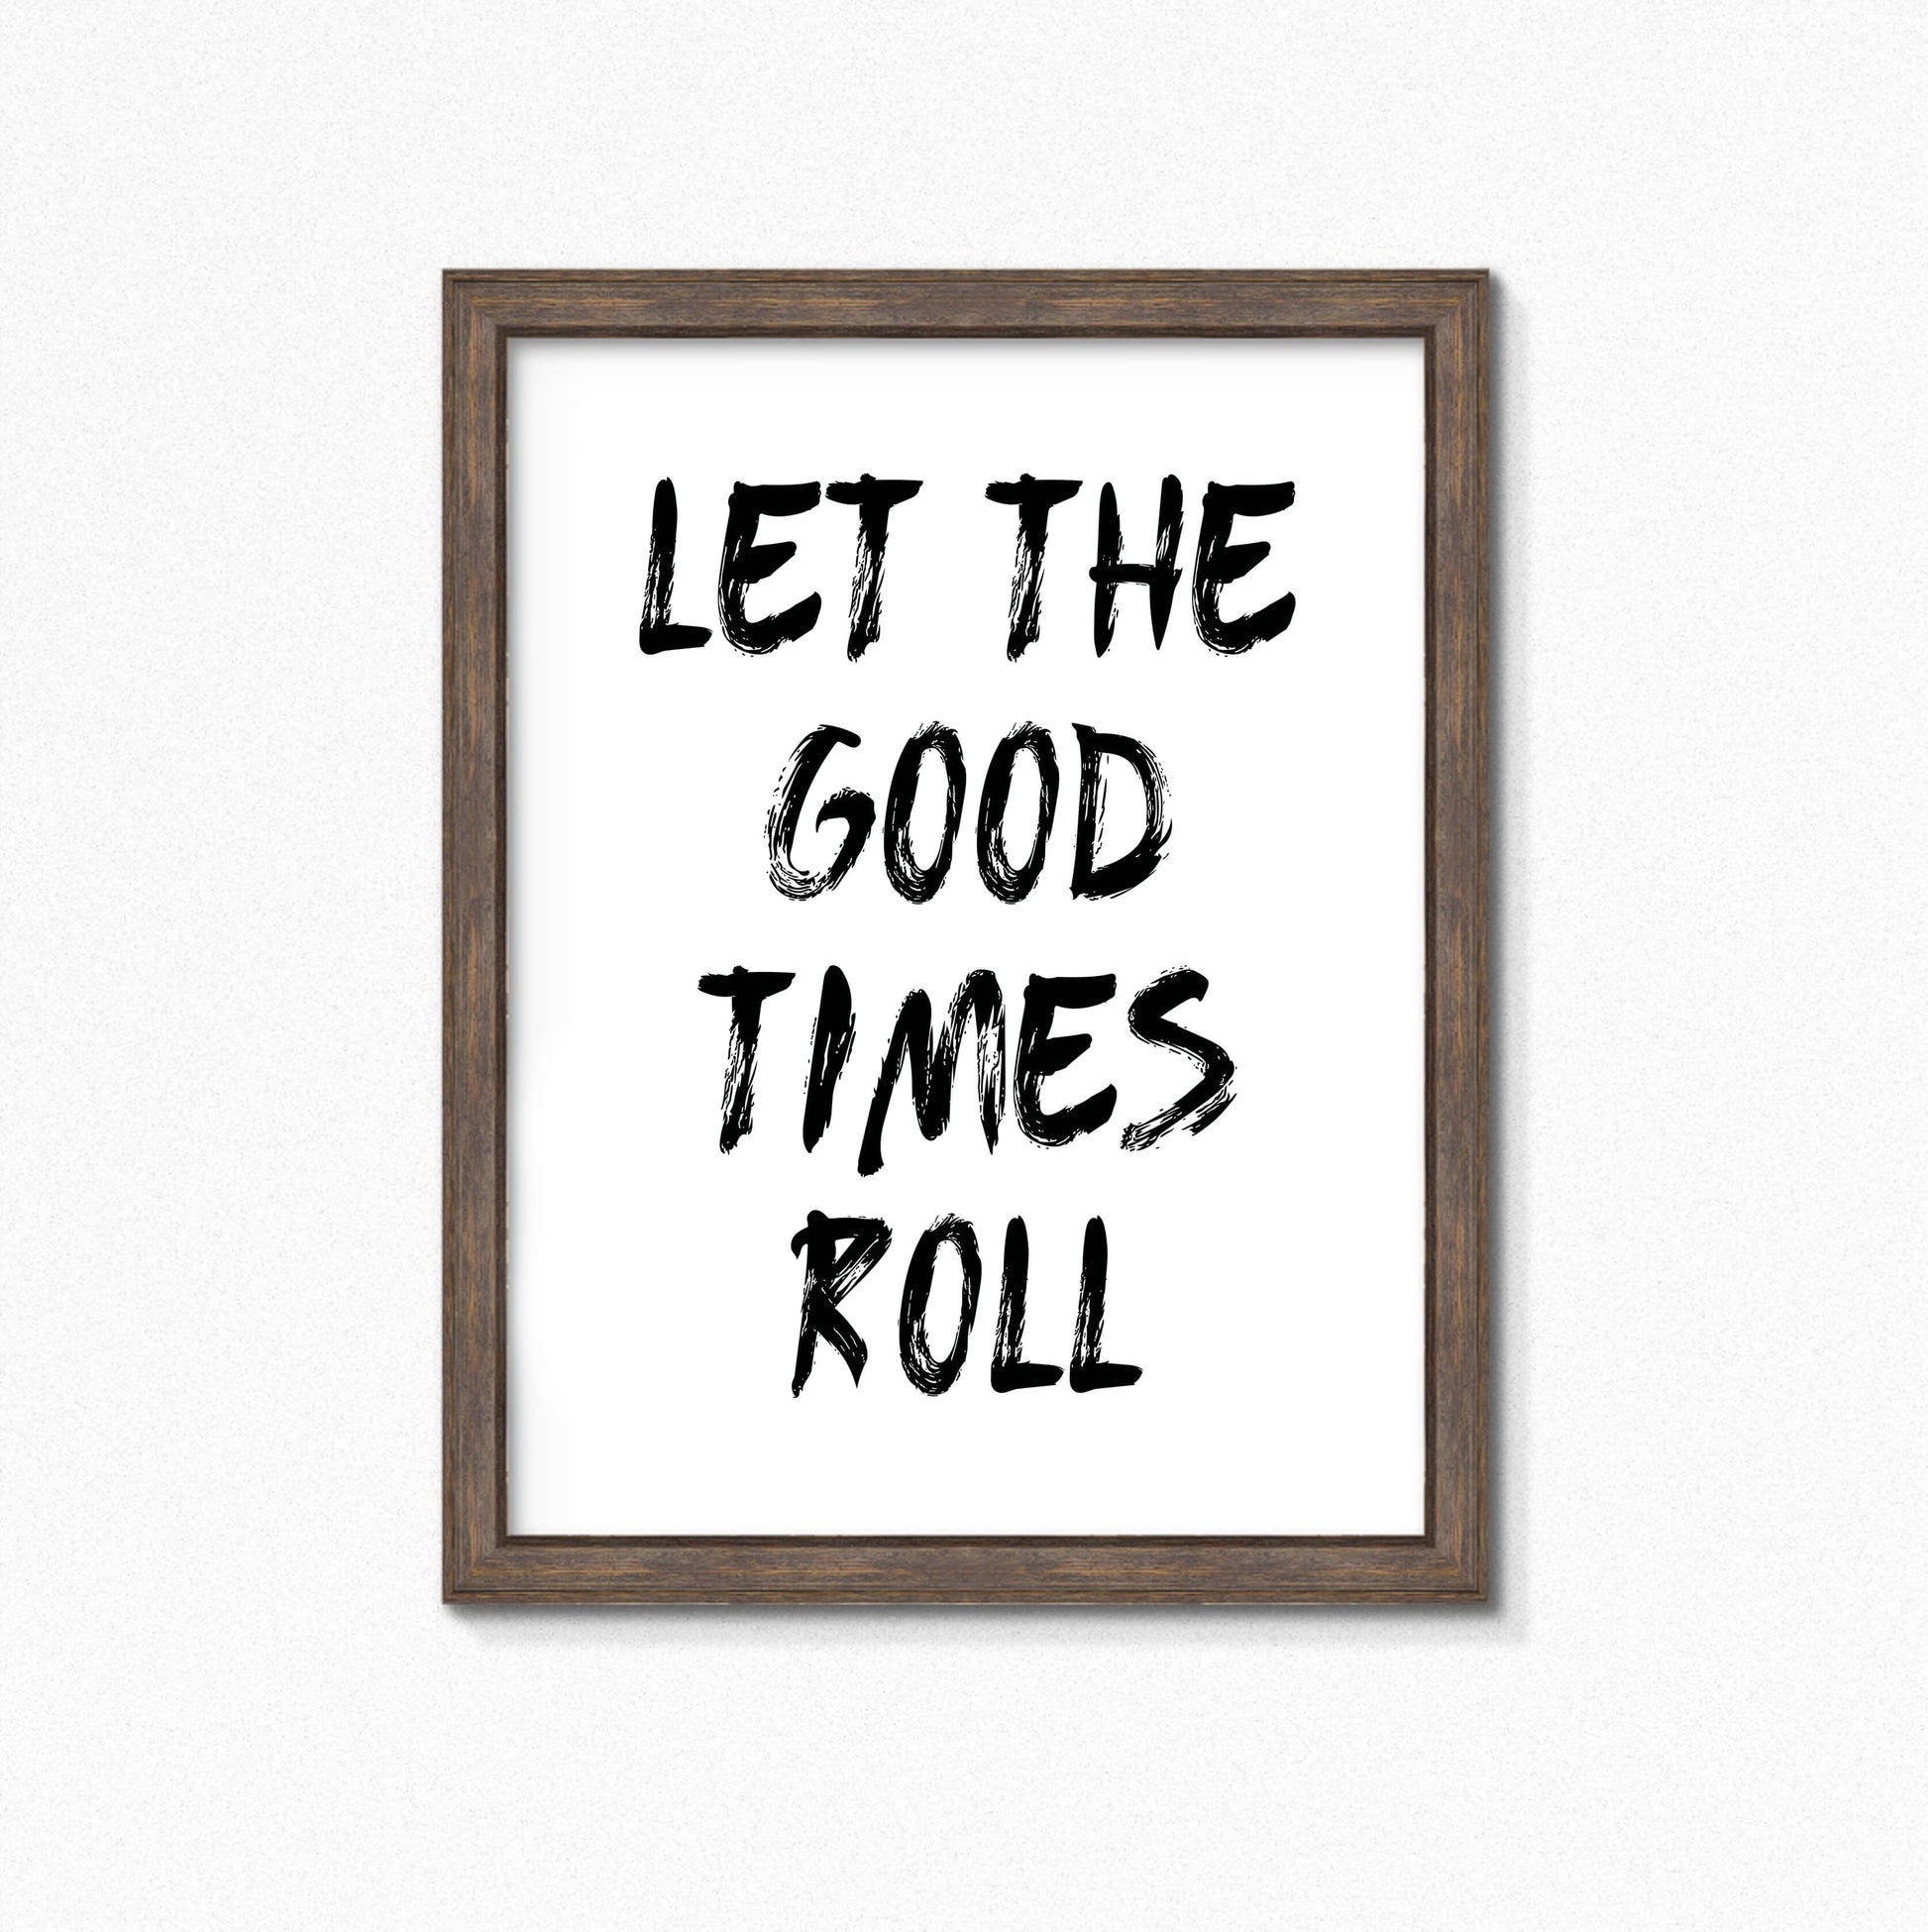 Let The Good Times Roll Print by SixElevenCreations. Product Code SEP0115